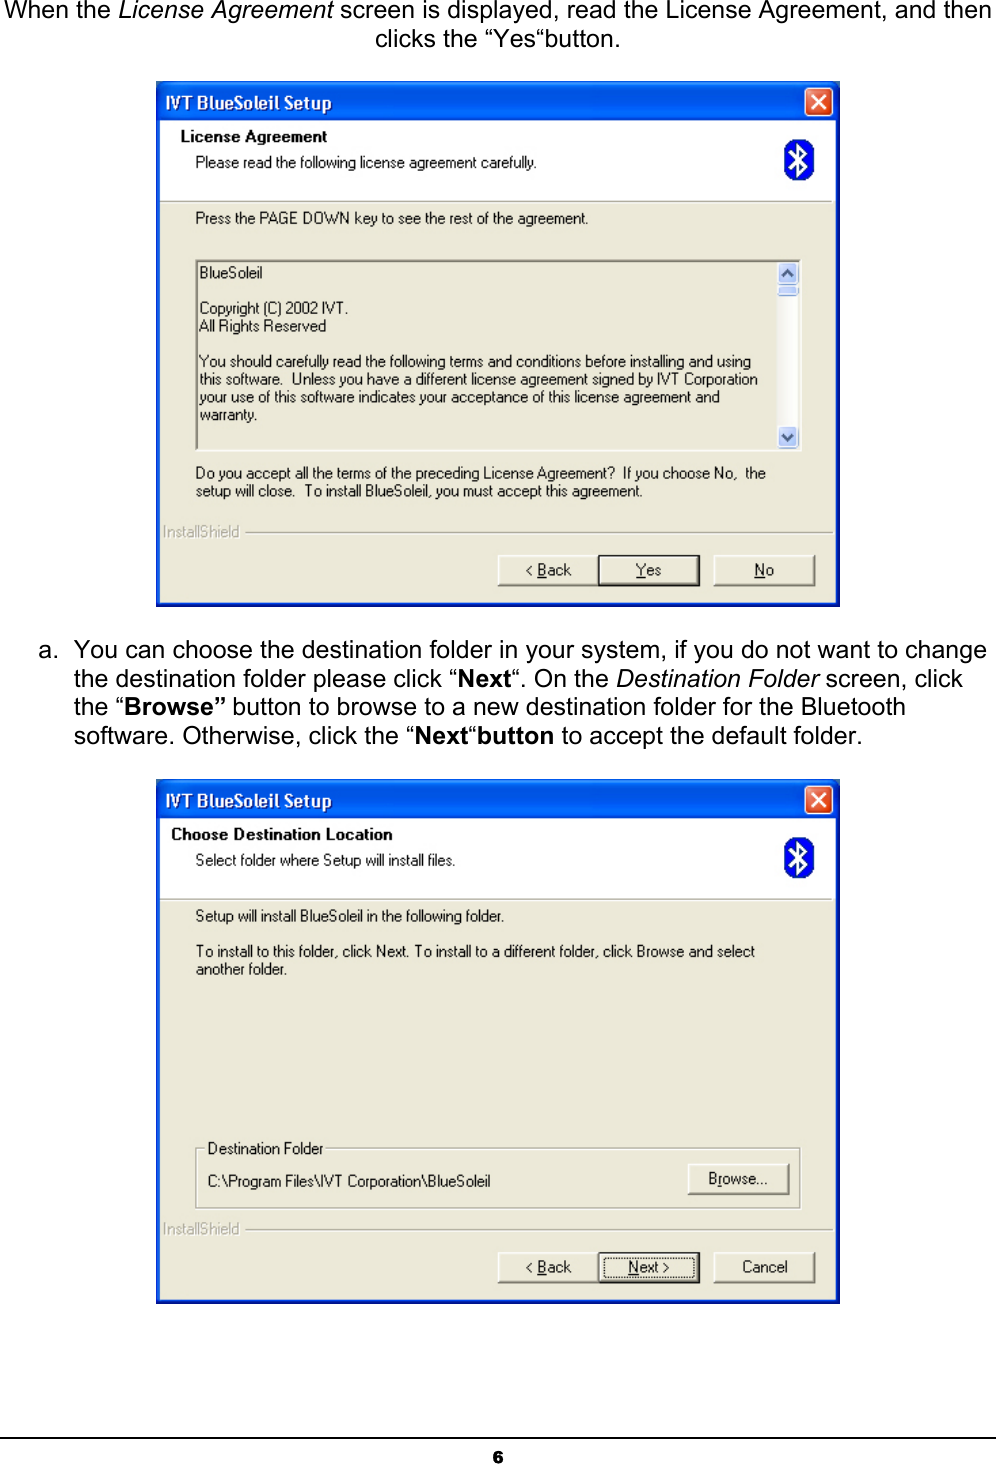   6When the License Agreement screen is displayed, read the License Agreement, and then clicks the “Yes“button.  a.  You can choose the destination folder in your system, if you do not want to change the destination folder please click “Next“. On the Destination Folder screen, click the “Browse” button to browse to a new destination folder for the Bluetooth software. Otherwise, click the “Next“button to accept the default folder.  